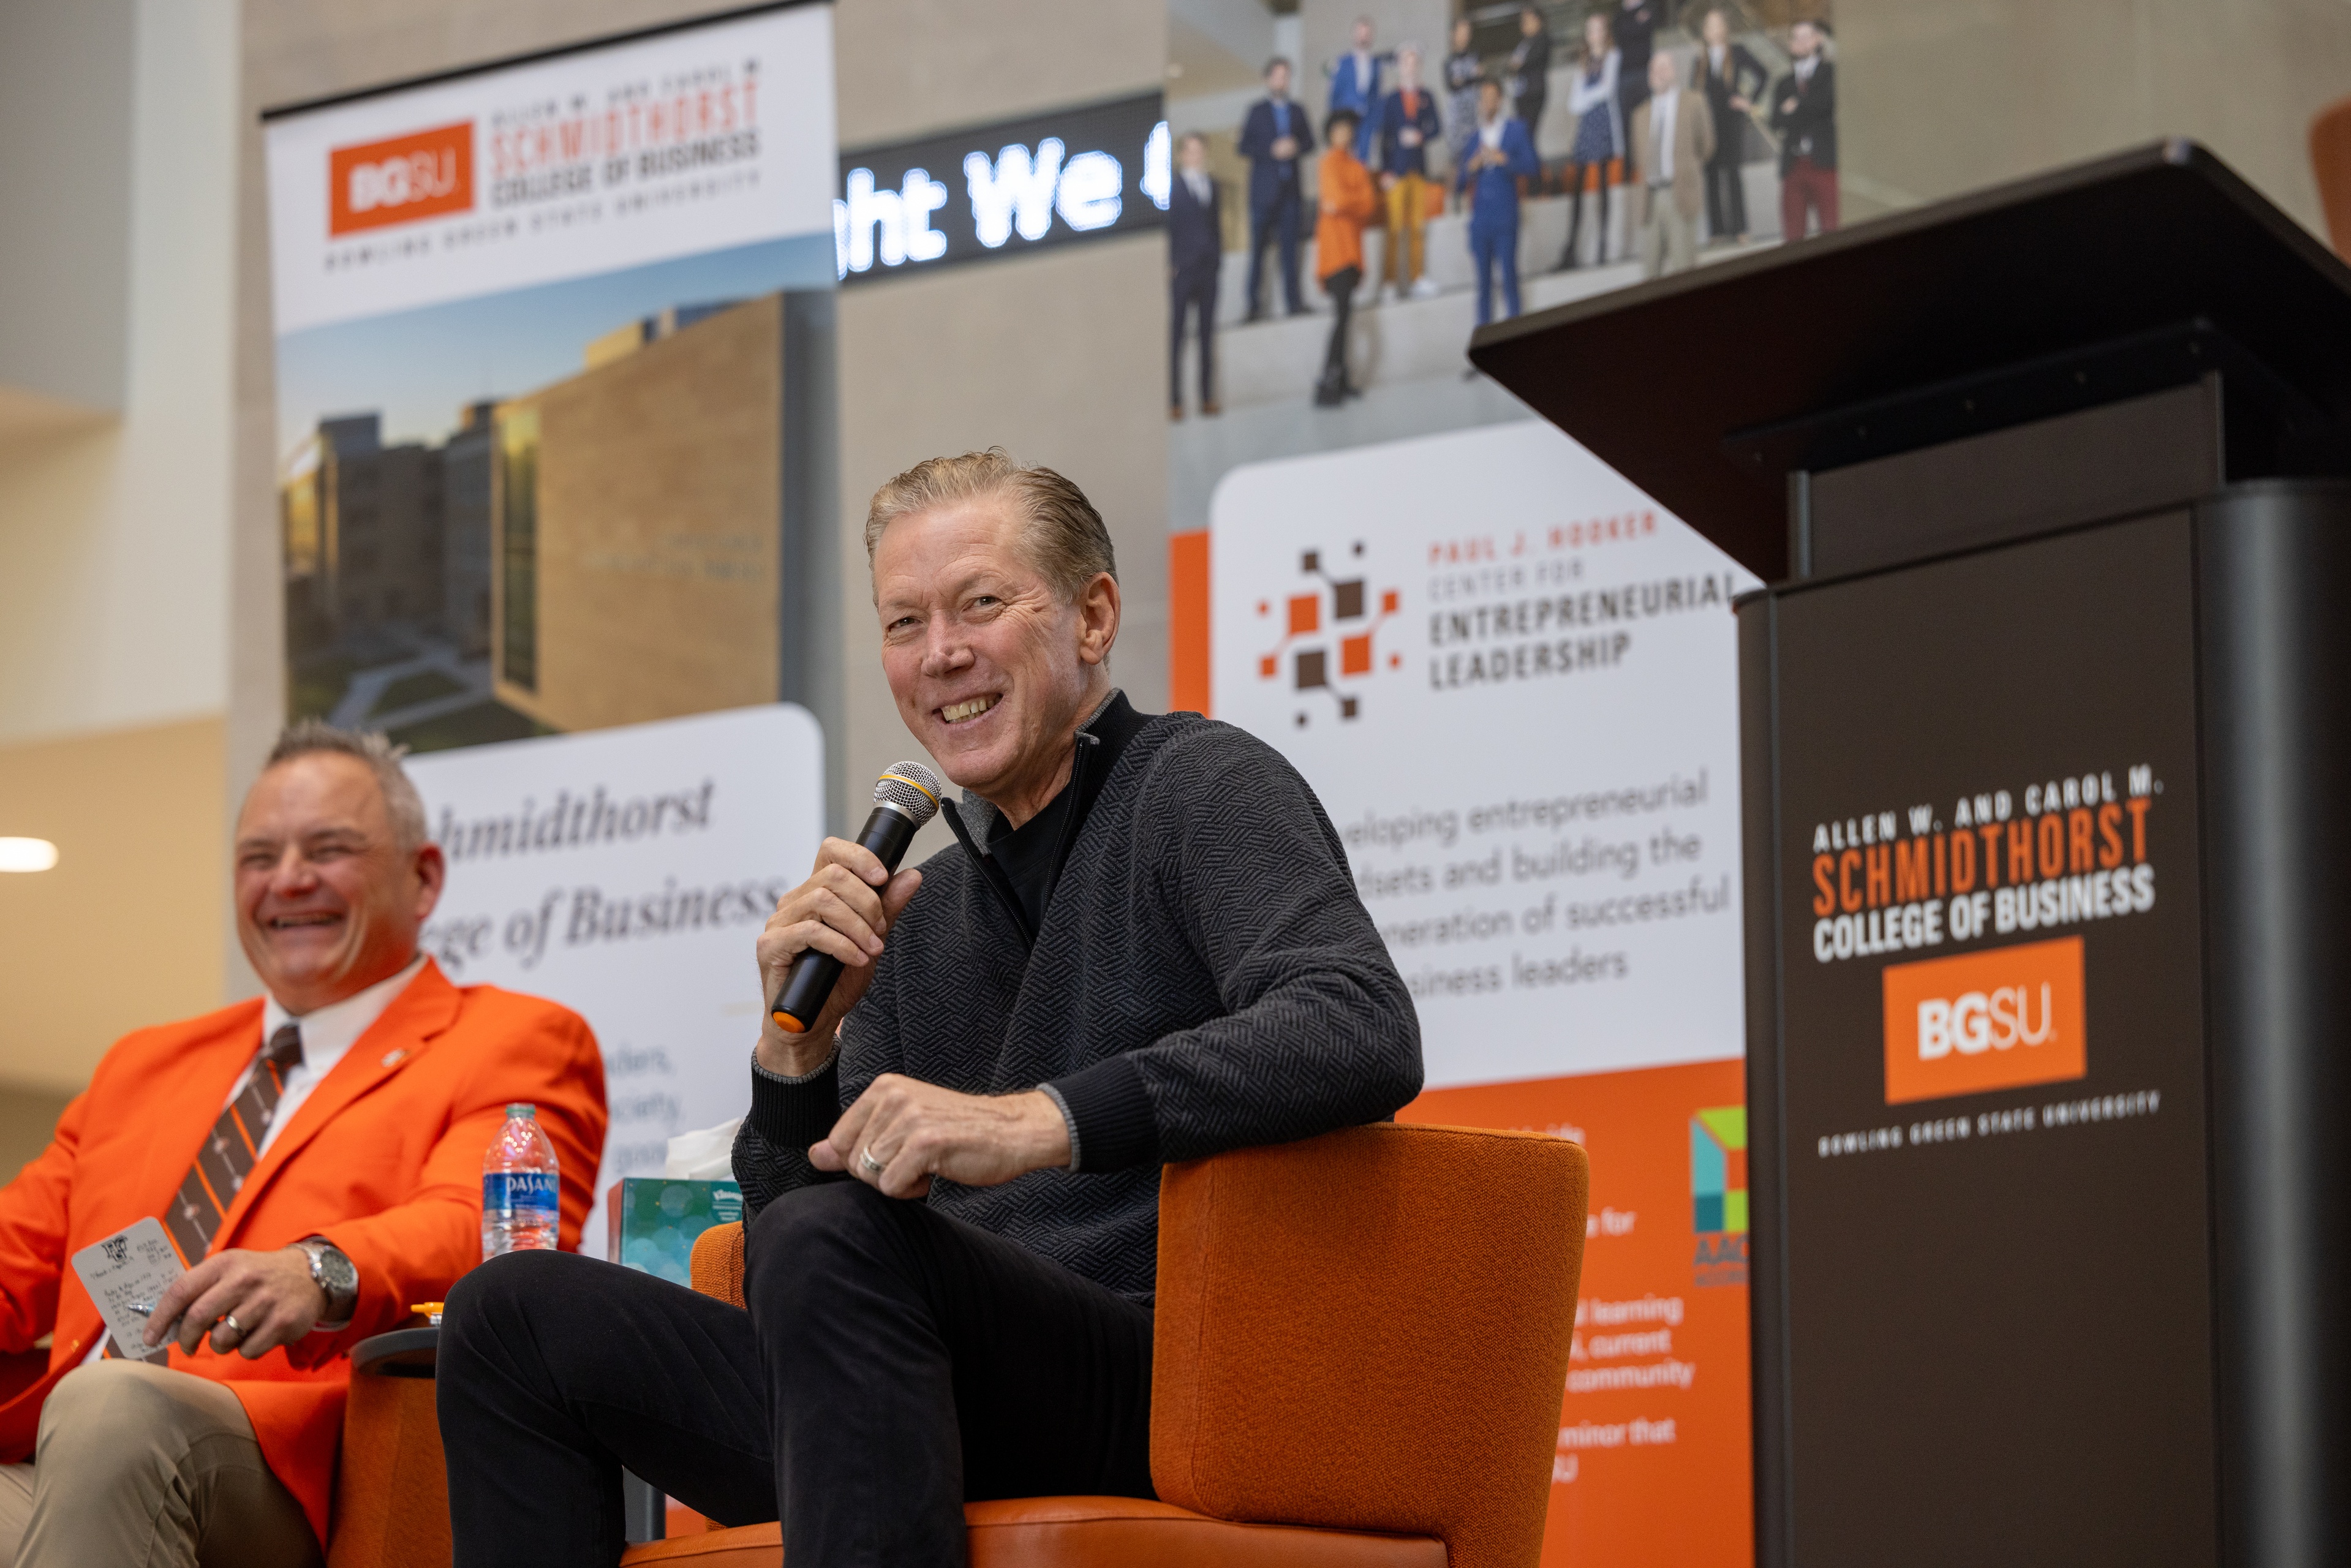 Two men are pictured sitting on a stage - at left is BGSU Athletics Director Derek van der Merwe and at right is MLB hall of fame pitcher Orel Hershiser